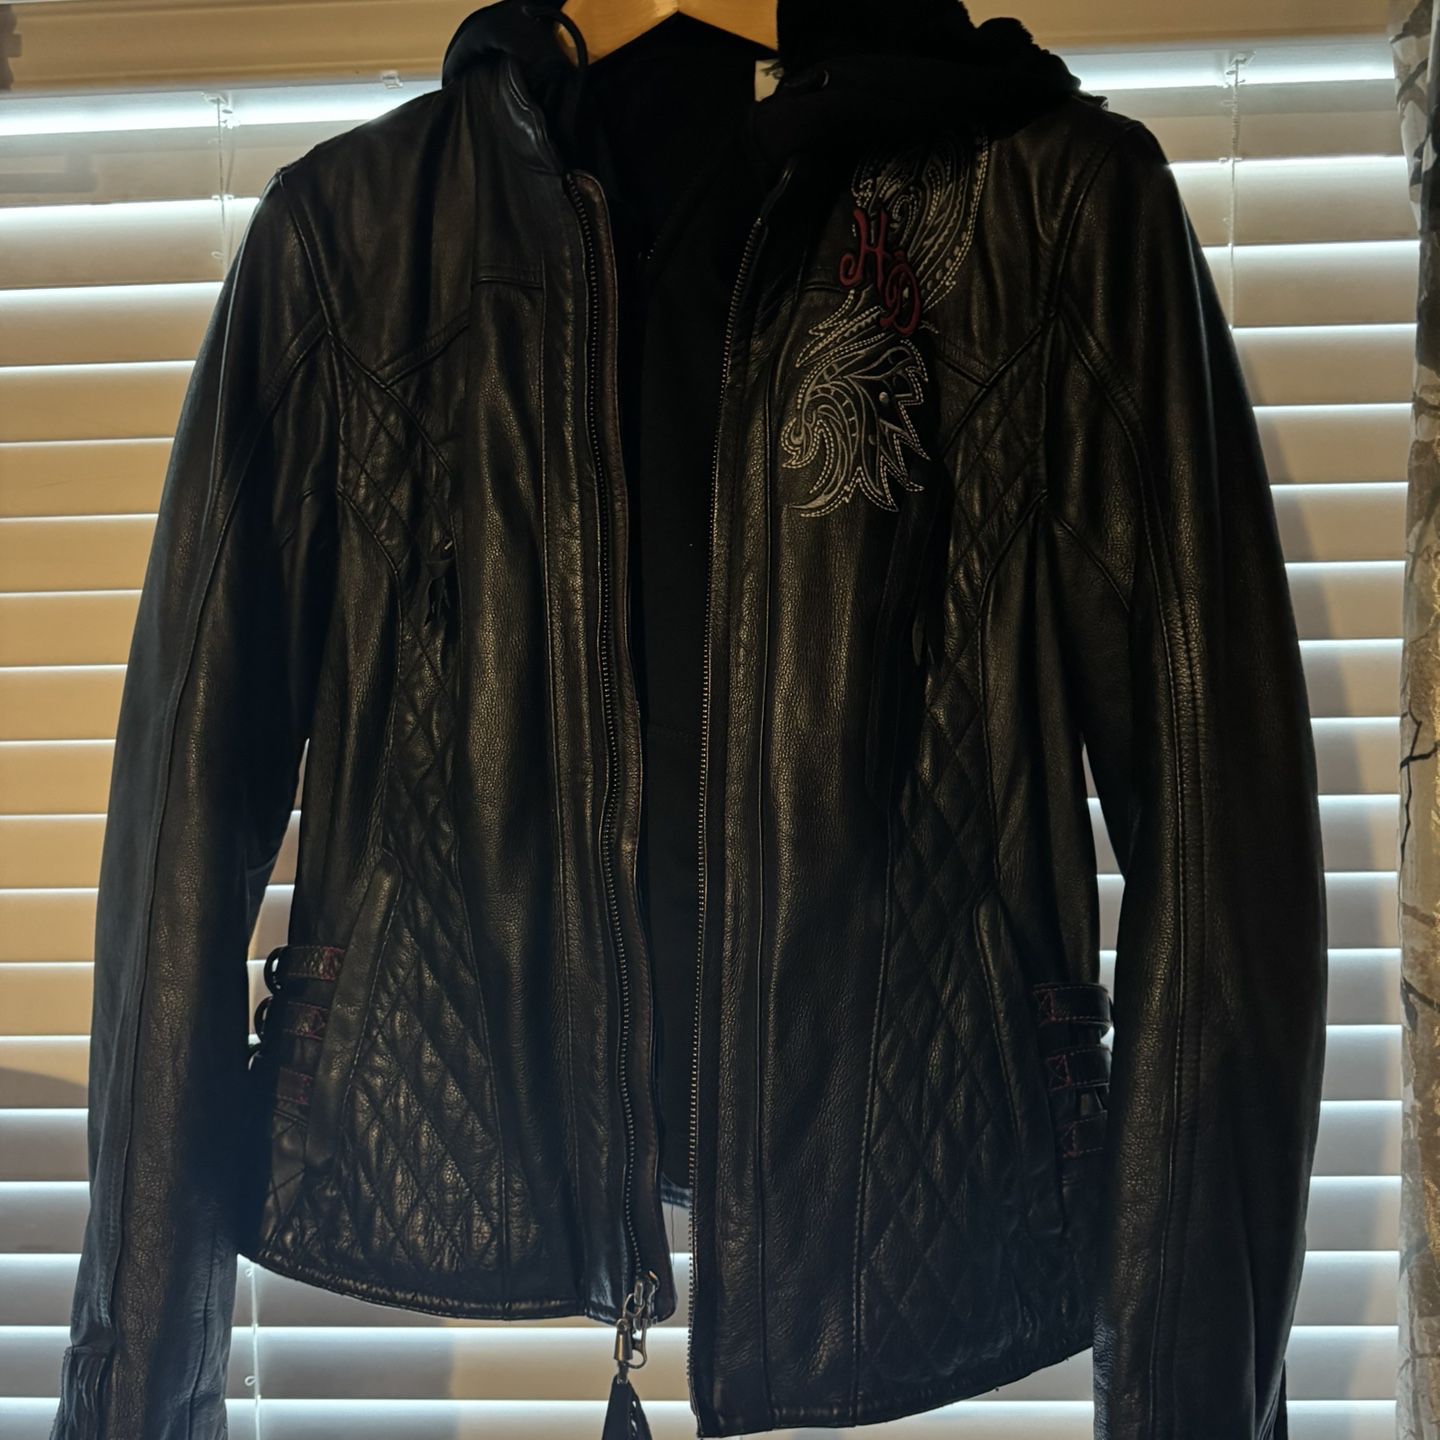 Harley Womens Jacket. This Is An Awesome Jacket With Liner.  I Hate To Part With It But Sold My Bike. 